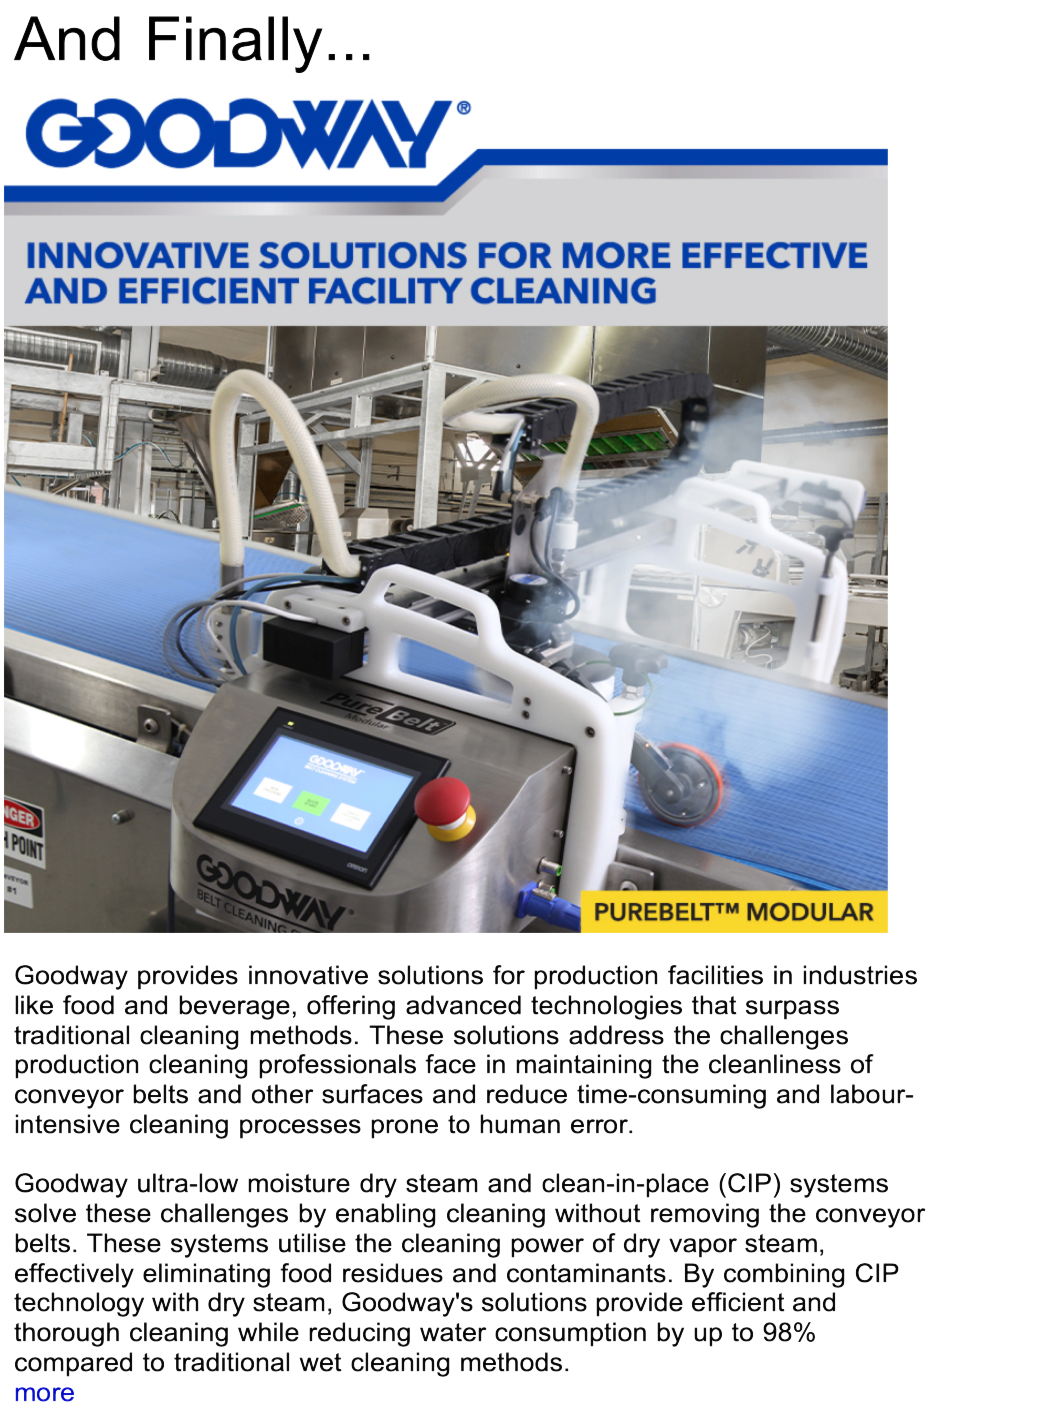 Advert: https://www.thecleanzine.com/pages/21695/goodway_innovative_solutions_for_production_facilities/